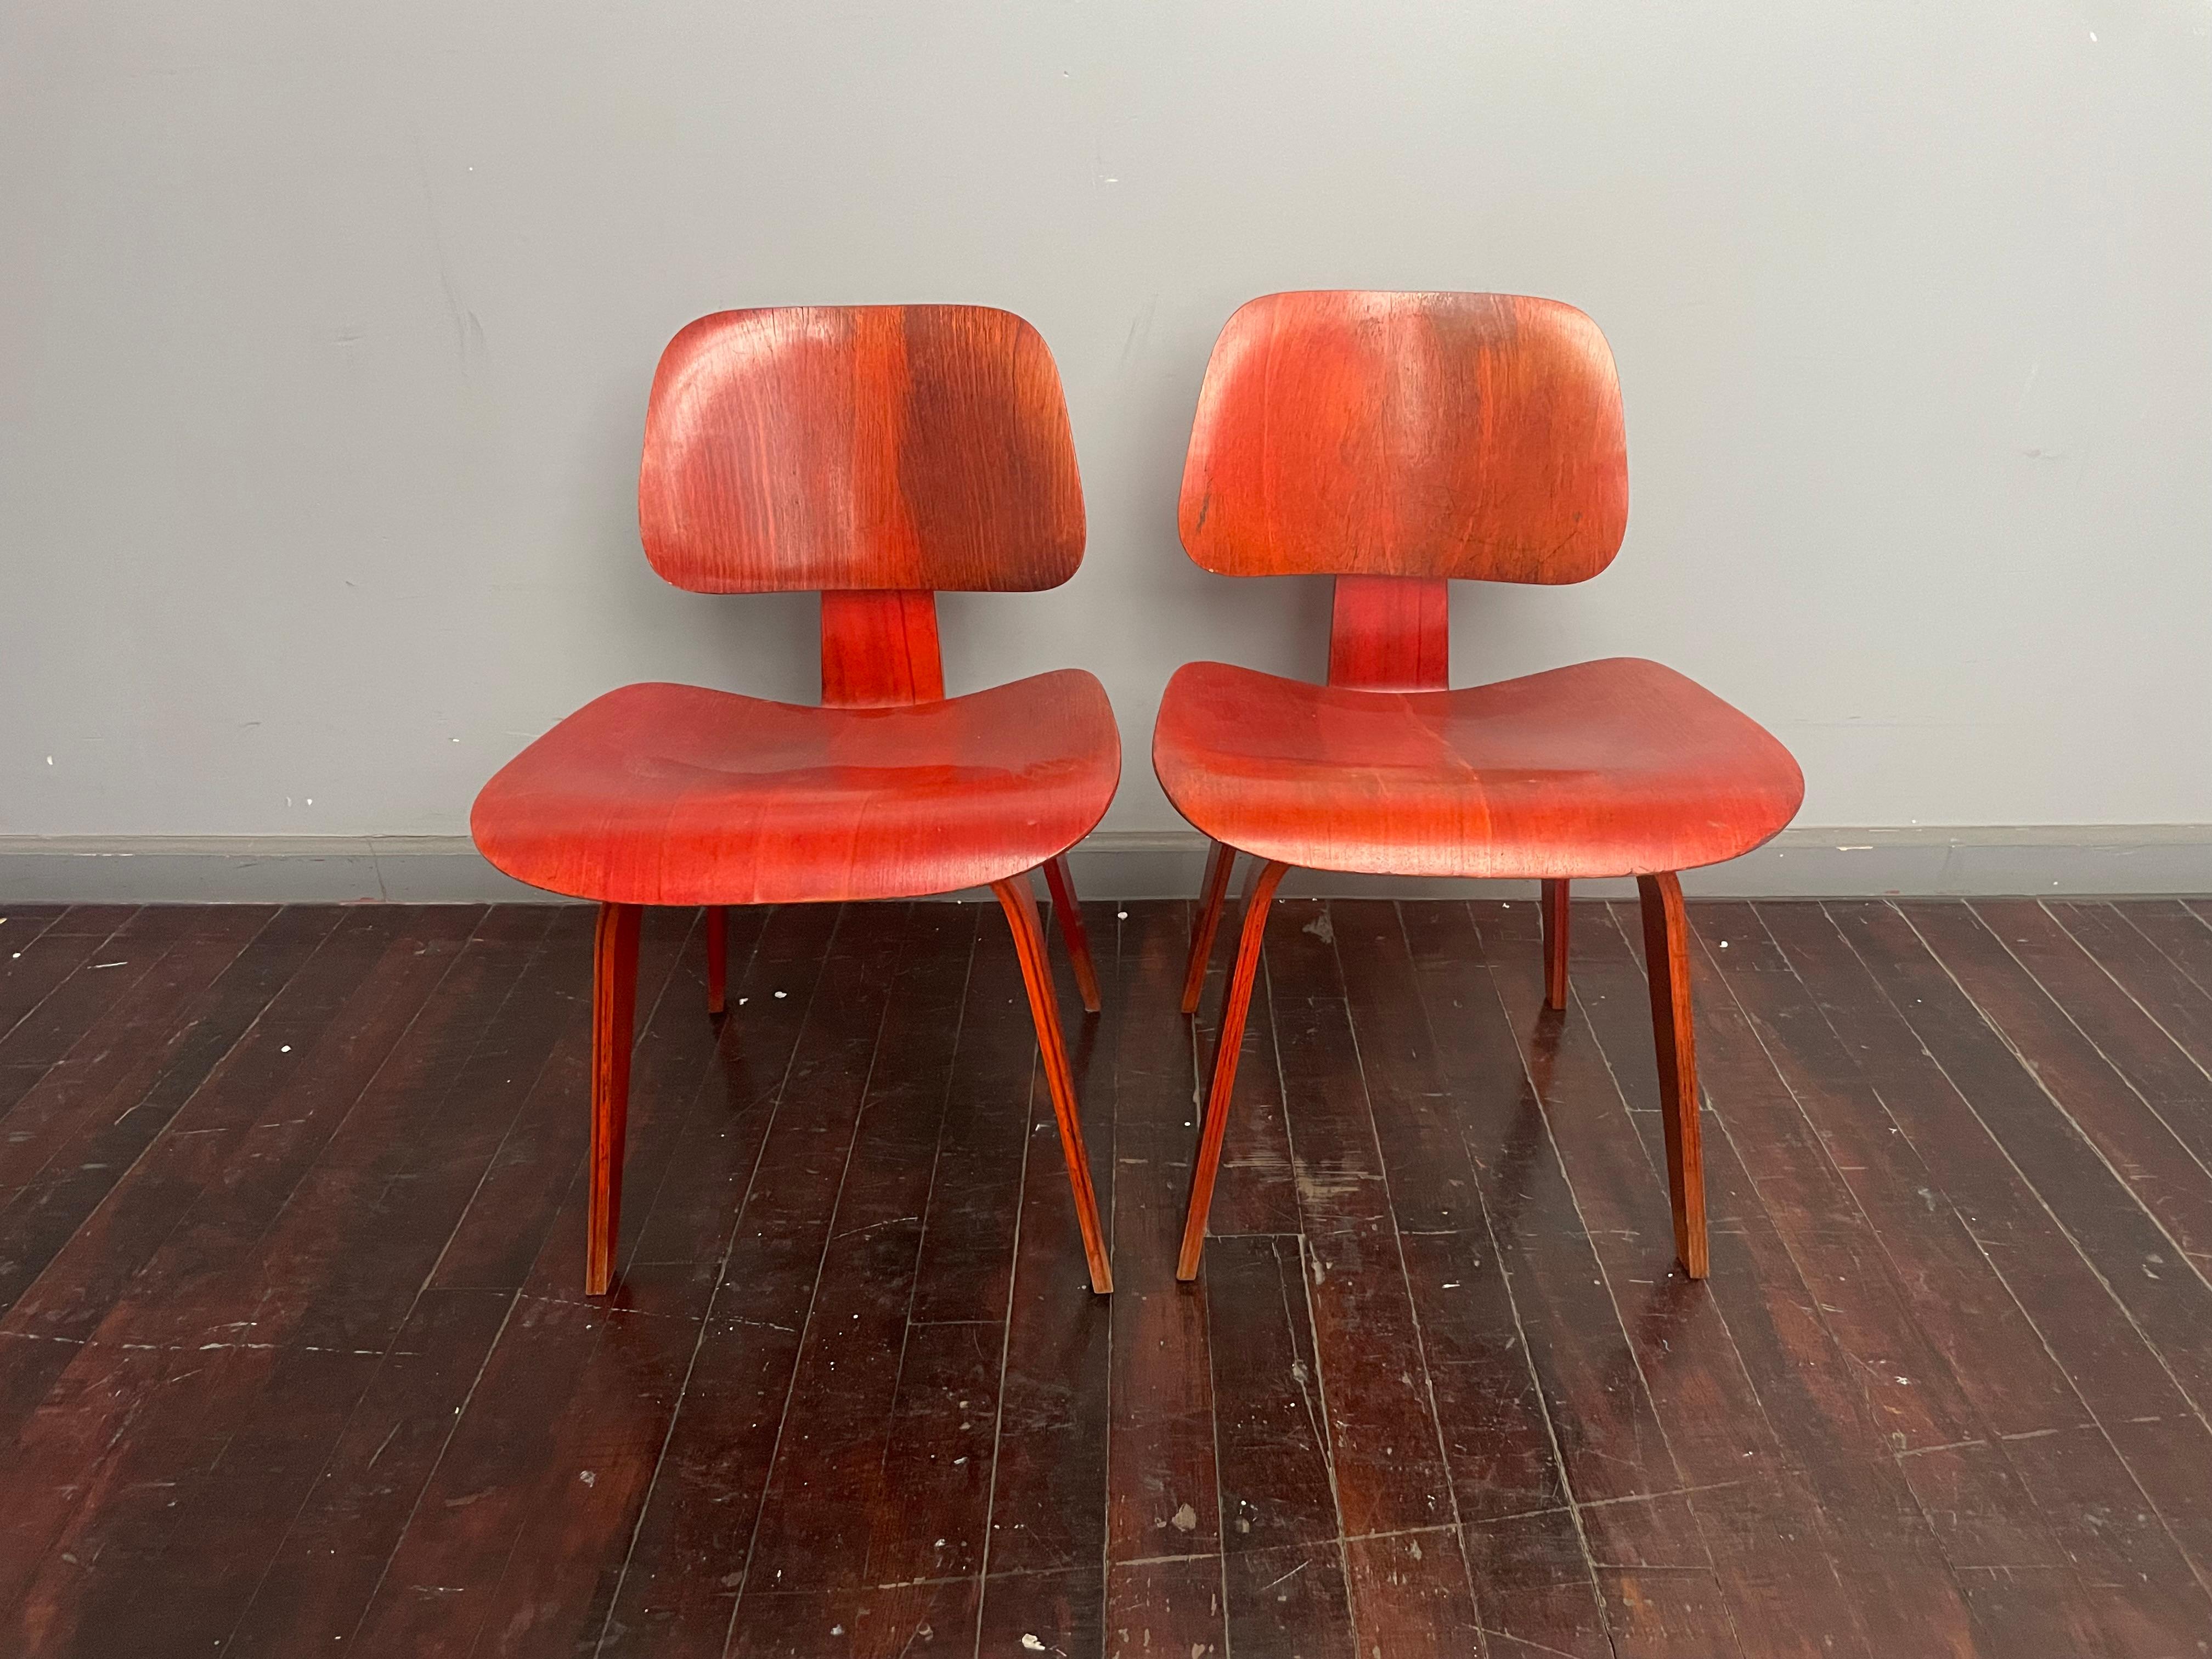 Presenting a rare pair of early edition Eames DCW chairs in red aniline dye. Both chairs retain the desirable Evans label, indicating these chairs were manufactured before 1950. 

Chairs show beautiful patina. 